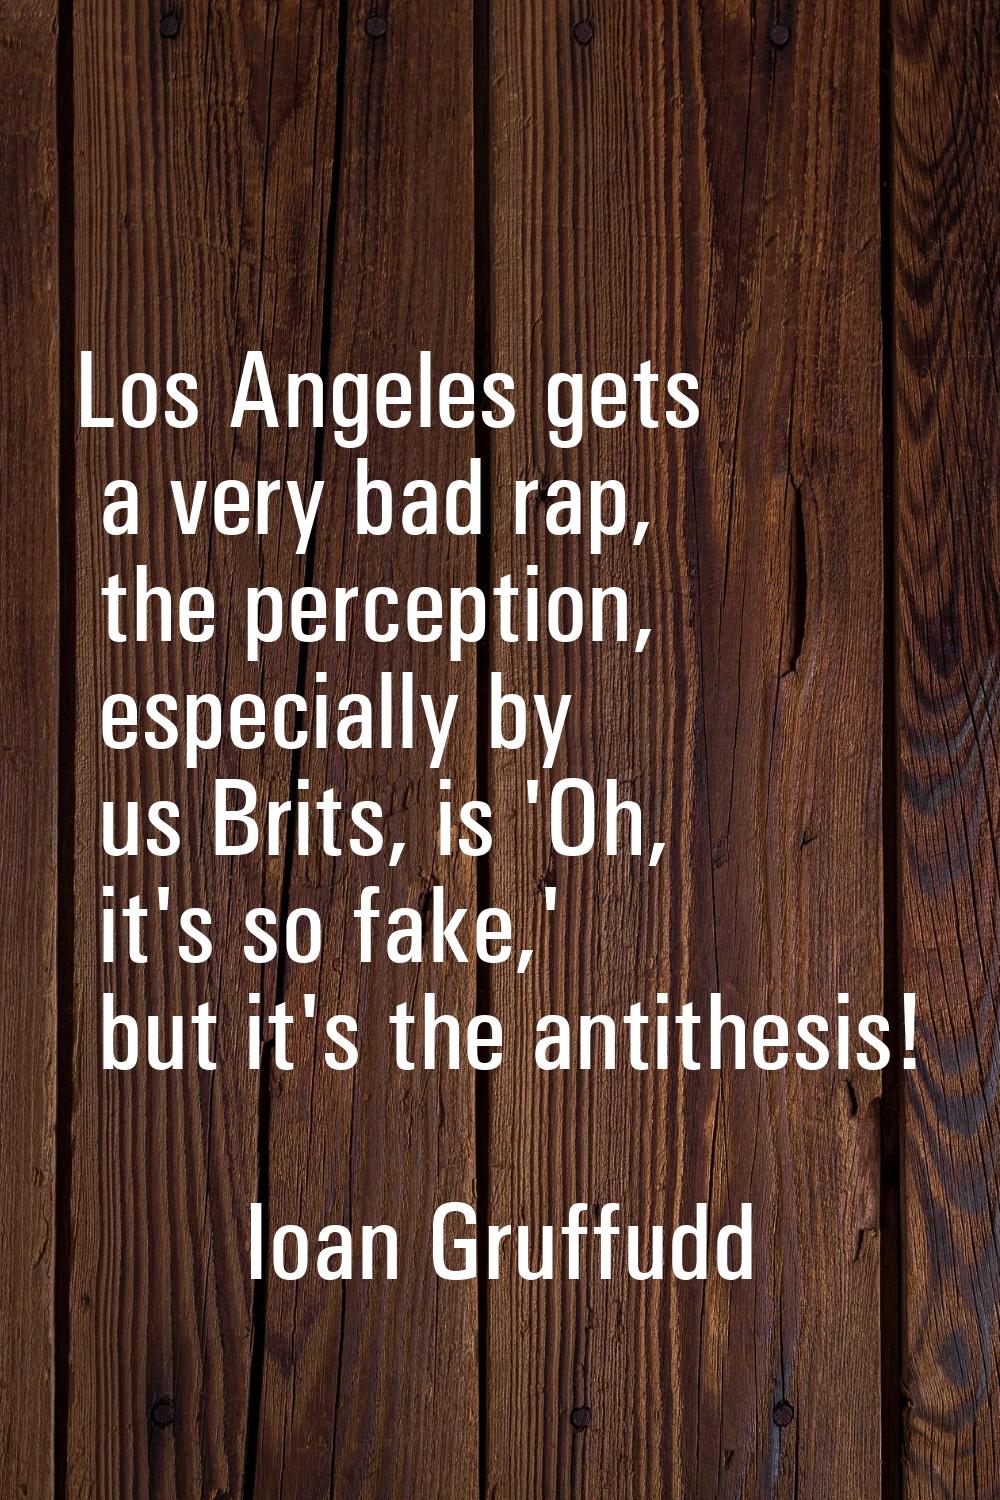 Los Angeles gets a very bad rap, the perception, especially by us Brits, is 'Oh, it's so fake,' but